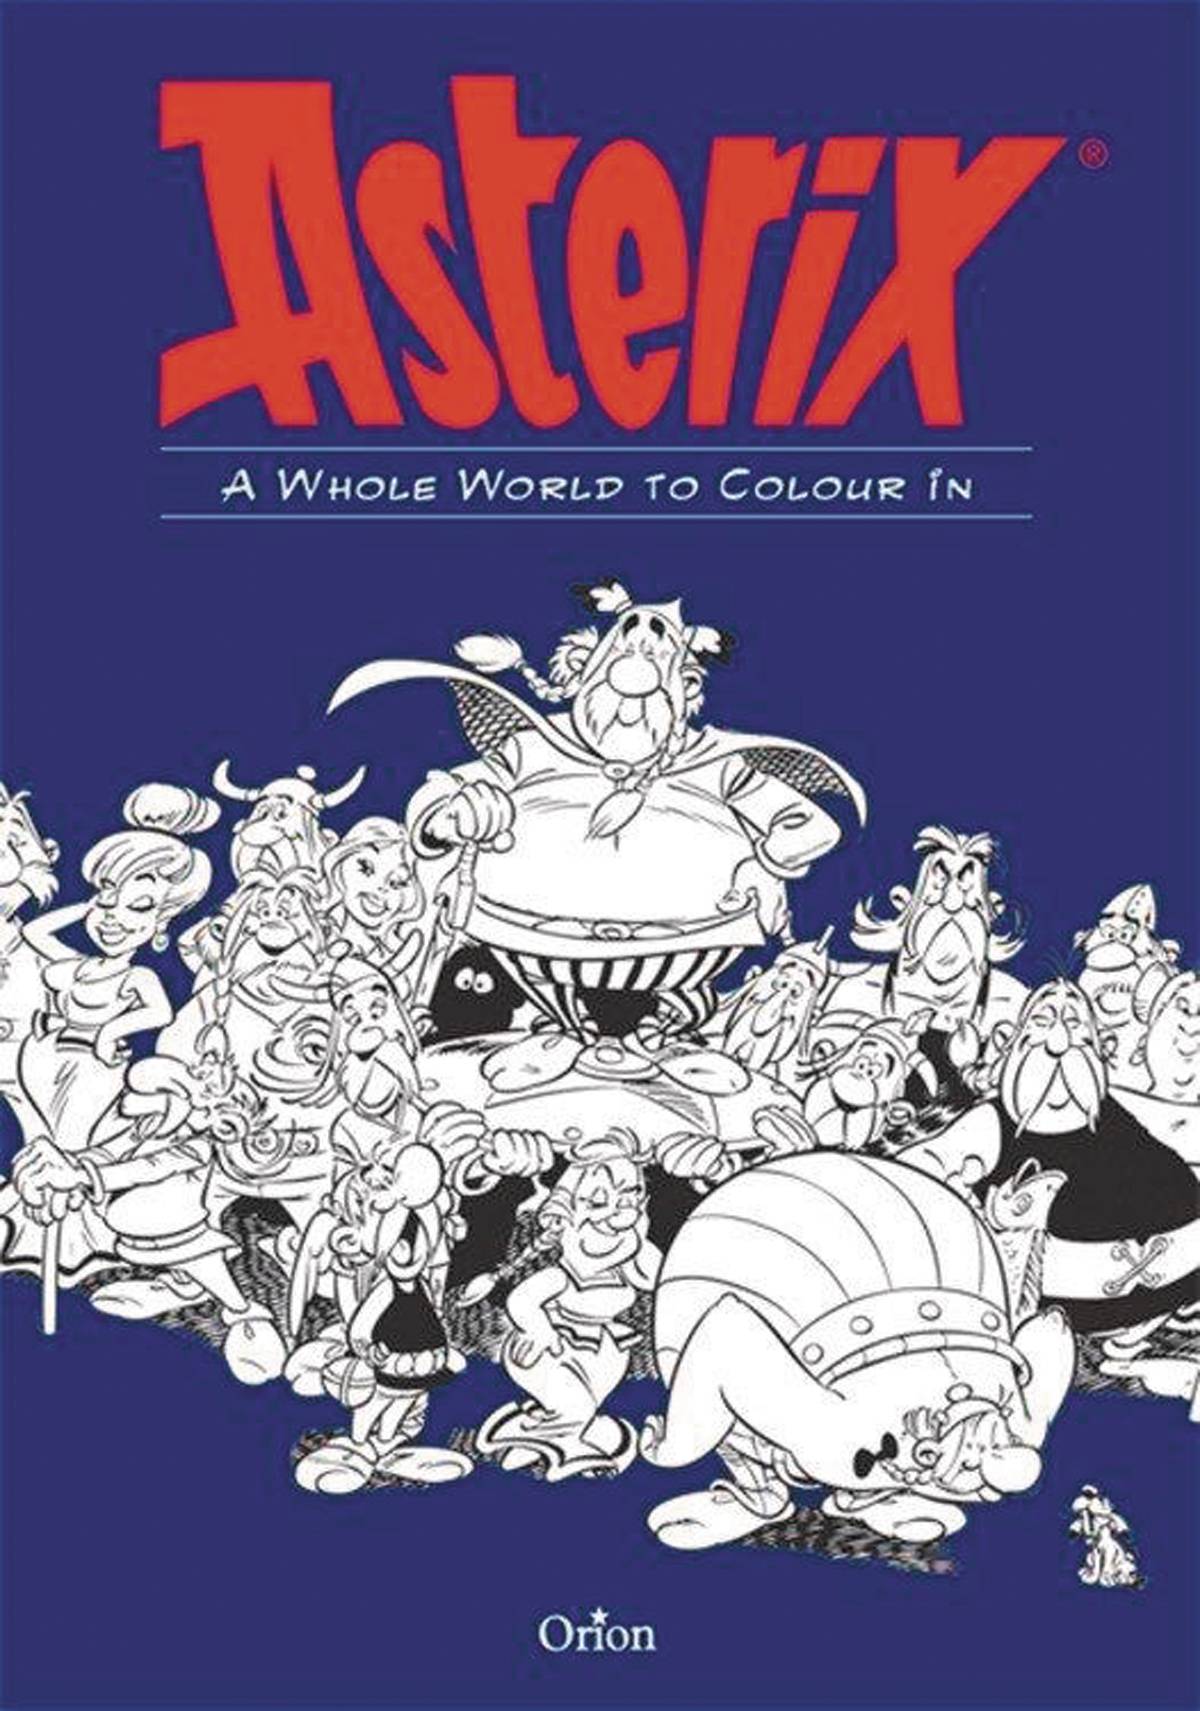 Asterix Whole World To Colour In Soft Cover